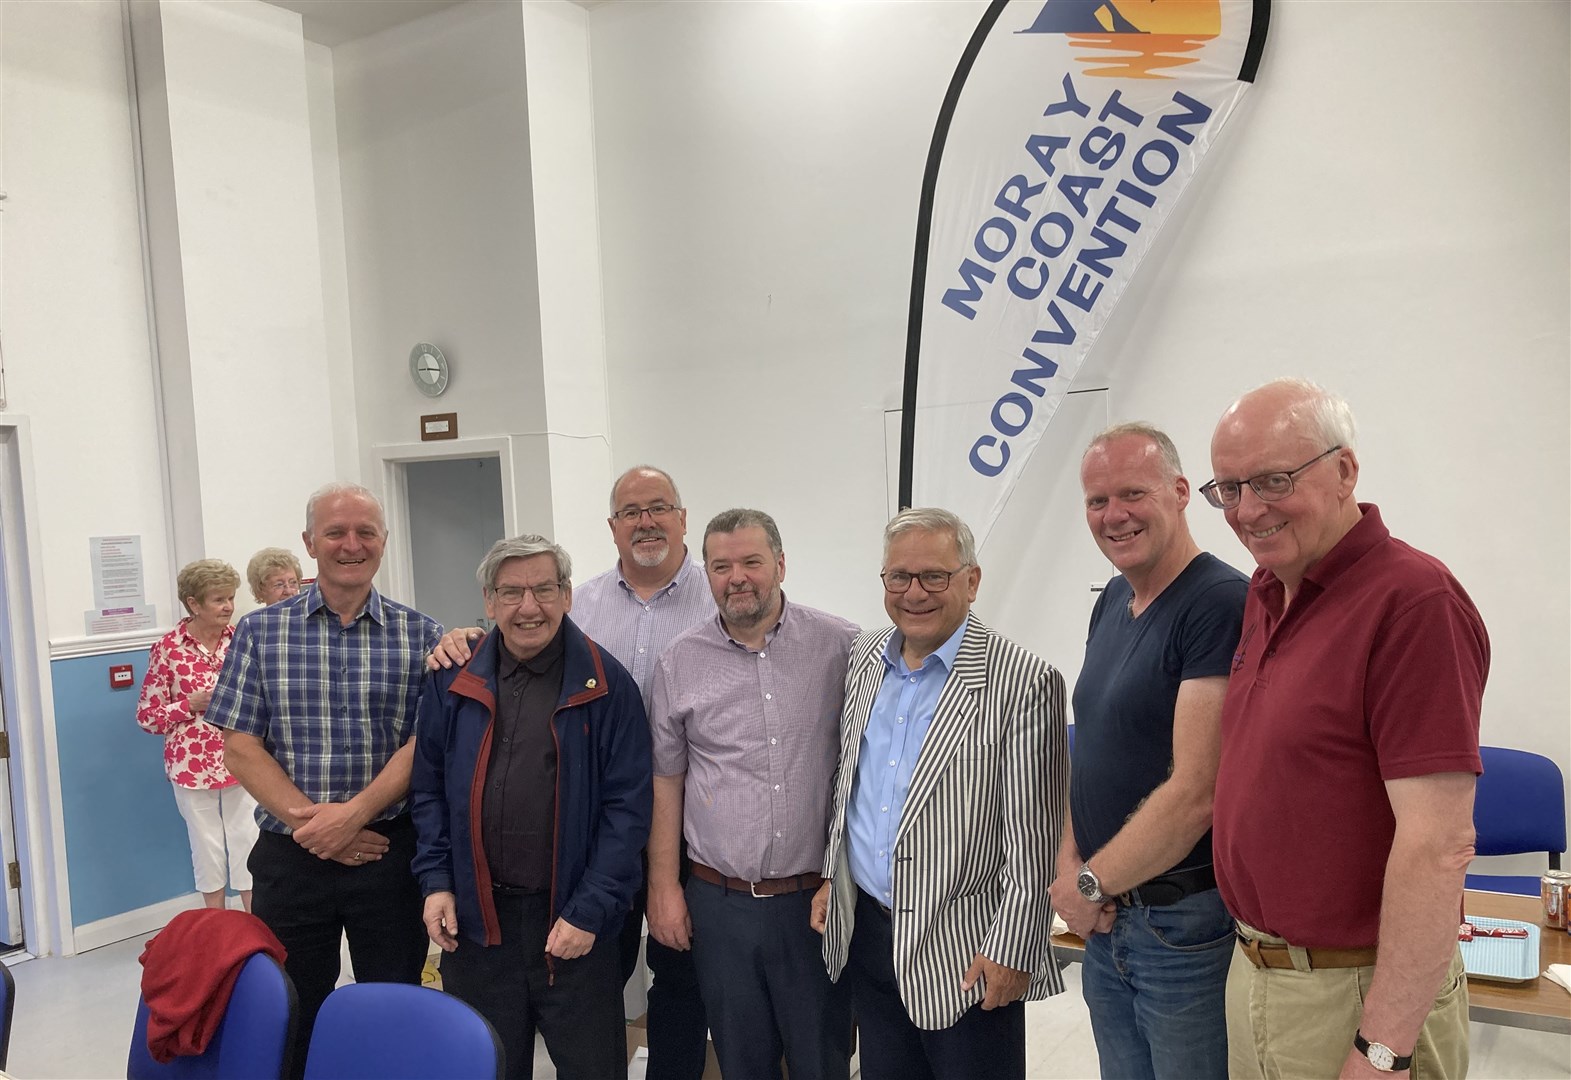 Moray Coast Convention chairman Bill Mowat (third left), and guest speakers Roger Carswell (third right) and Rev Dr Colin Dow (second right) are joined by committee members (from left) Alex Bain, Graeme Thain, Rev Graham Swanson and John Matheson. Picture: Moray Coast Convention